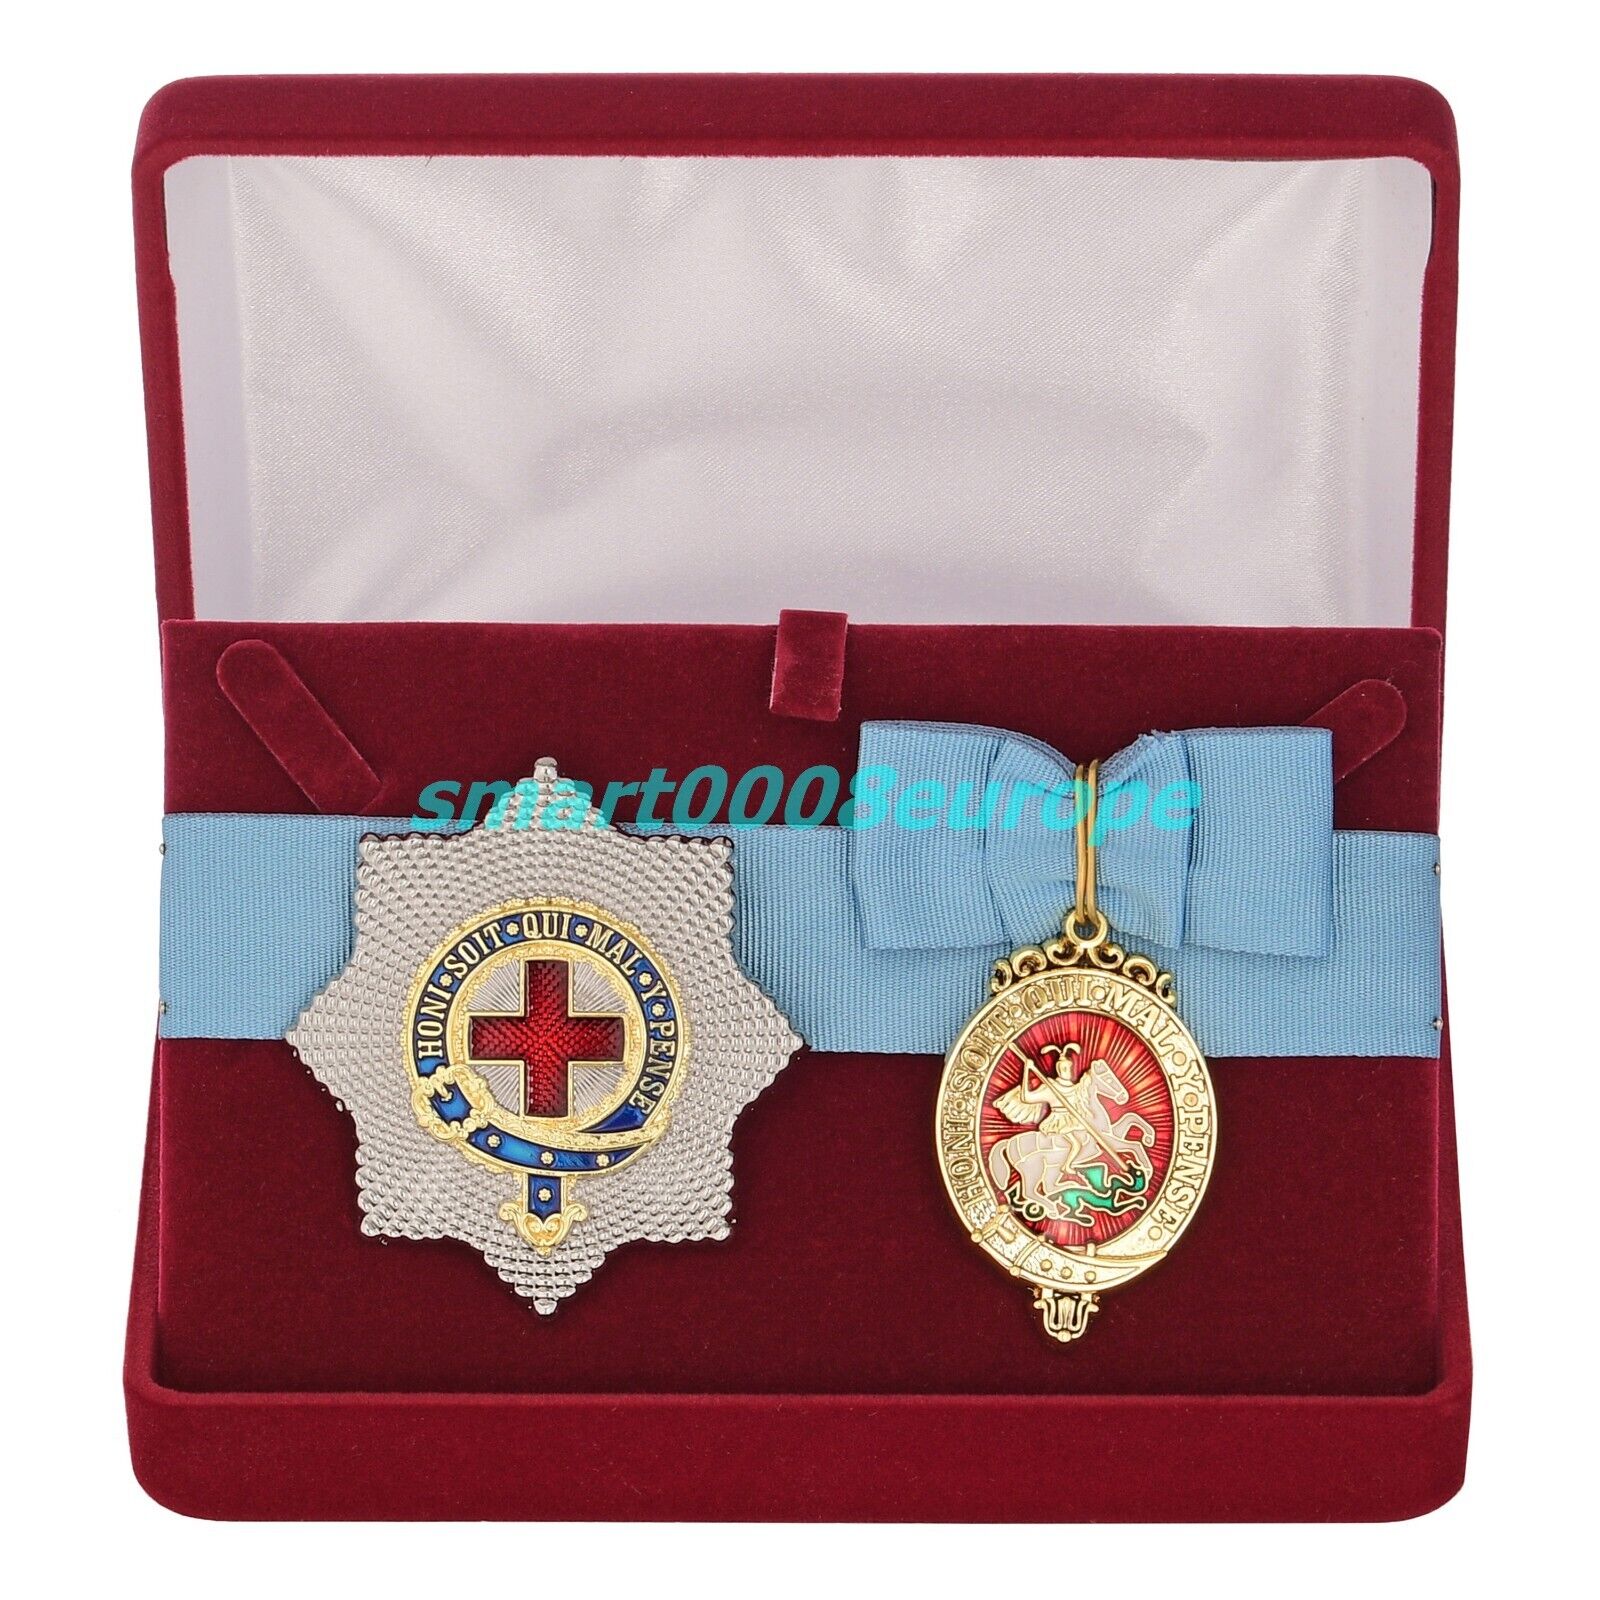 Badge and star of the Order of the Garter in a gift box, Great Britain. Repro